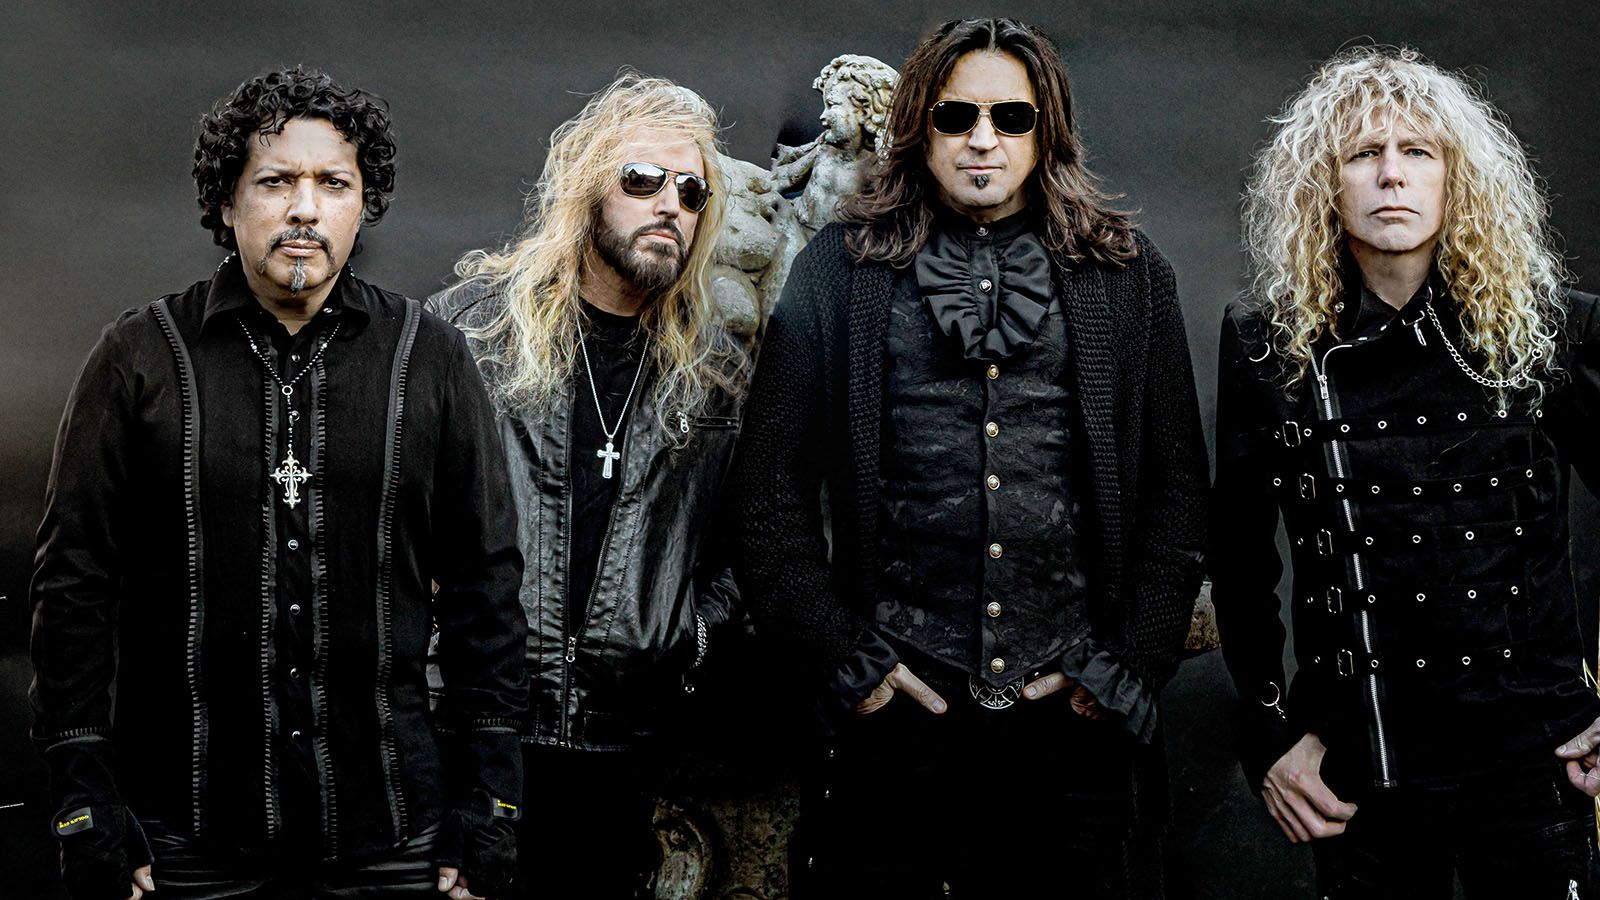 Christian metal stalwarts Stryper will be at Eagles Theatre in Wabash on May 16.